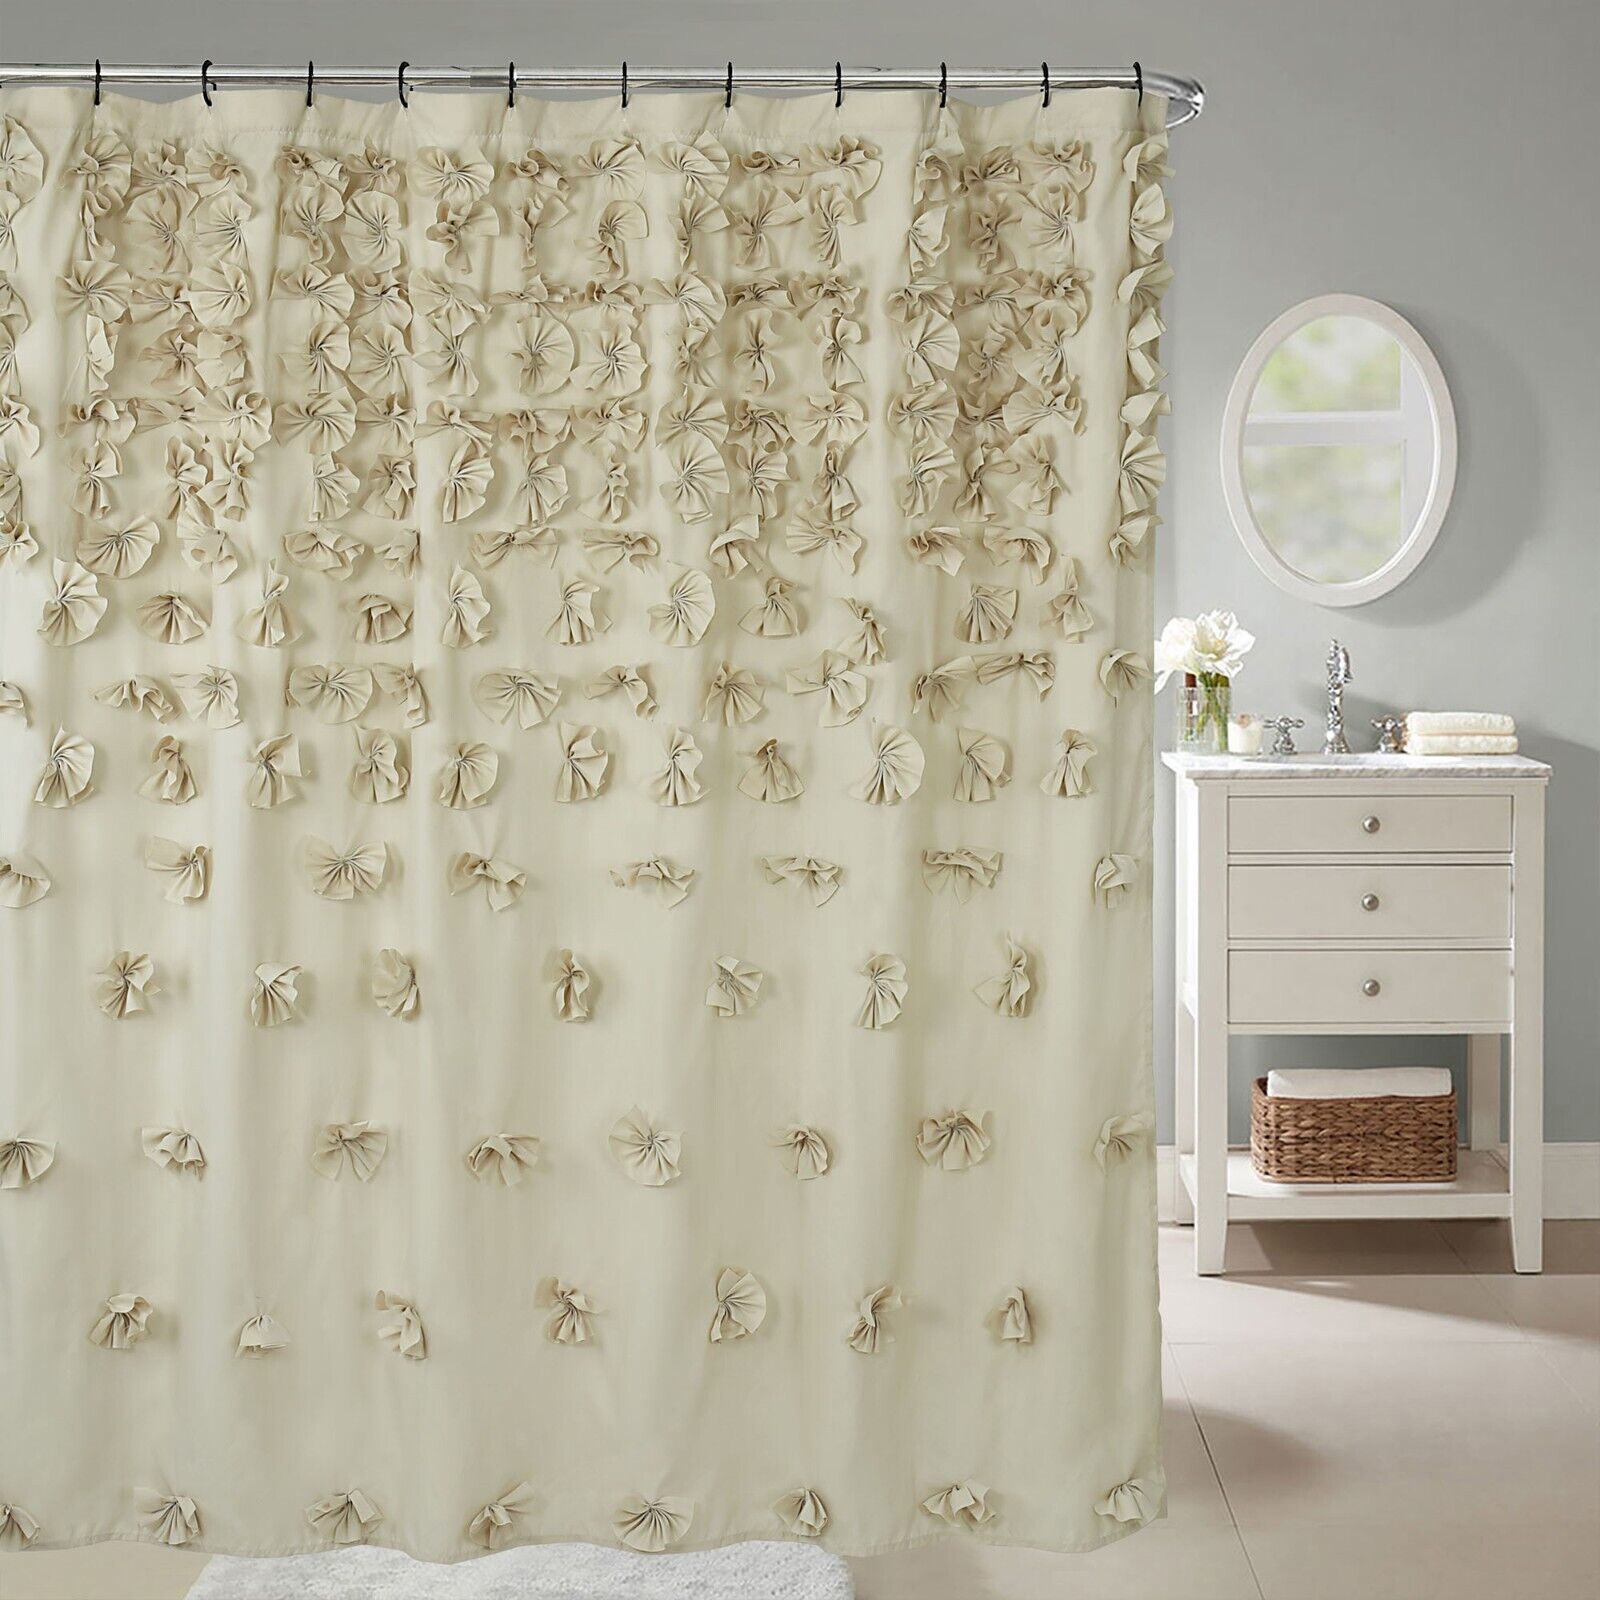 Primary image for HIG Farmhouse Shower Curtain with Handmade Bow Ties for Bathroom 72''x72''